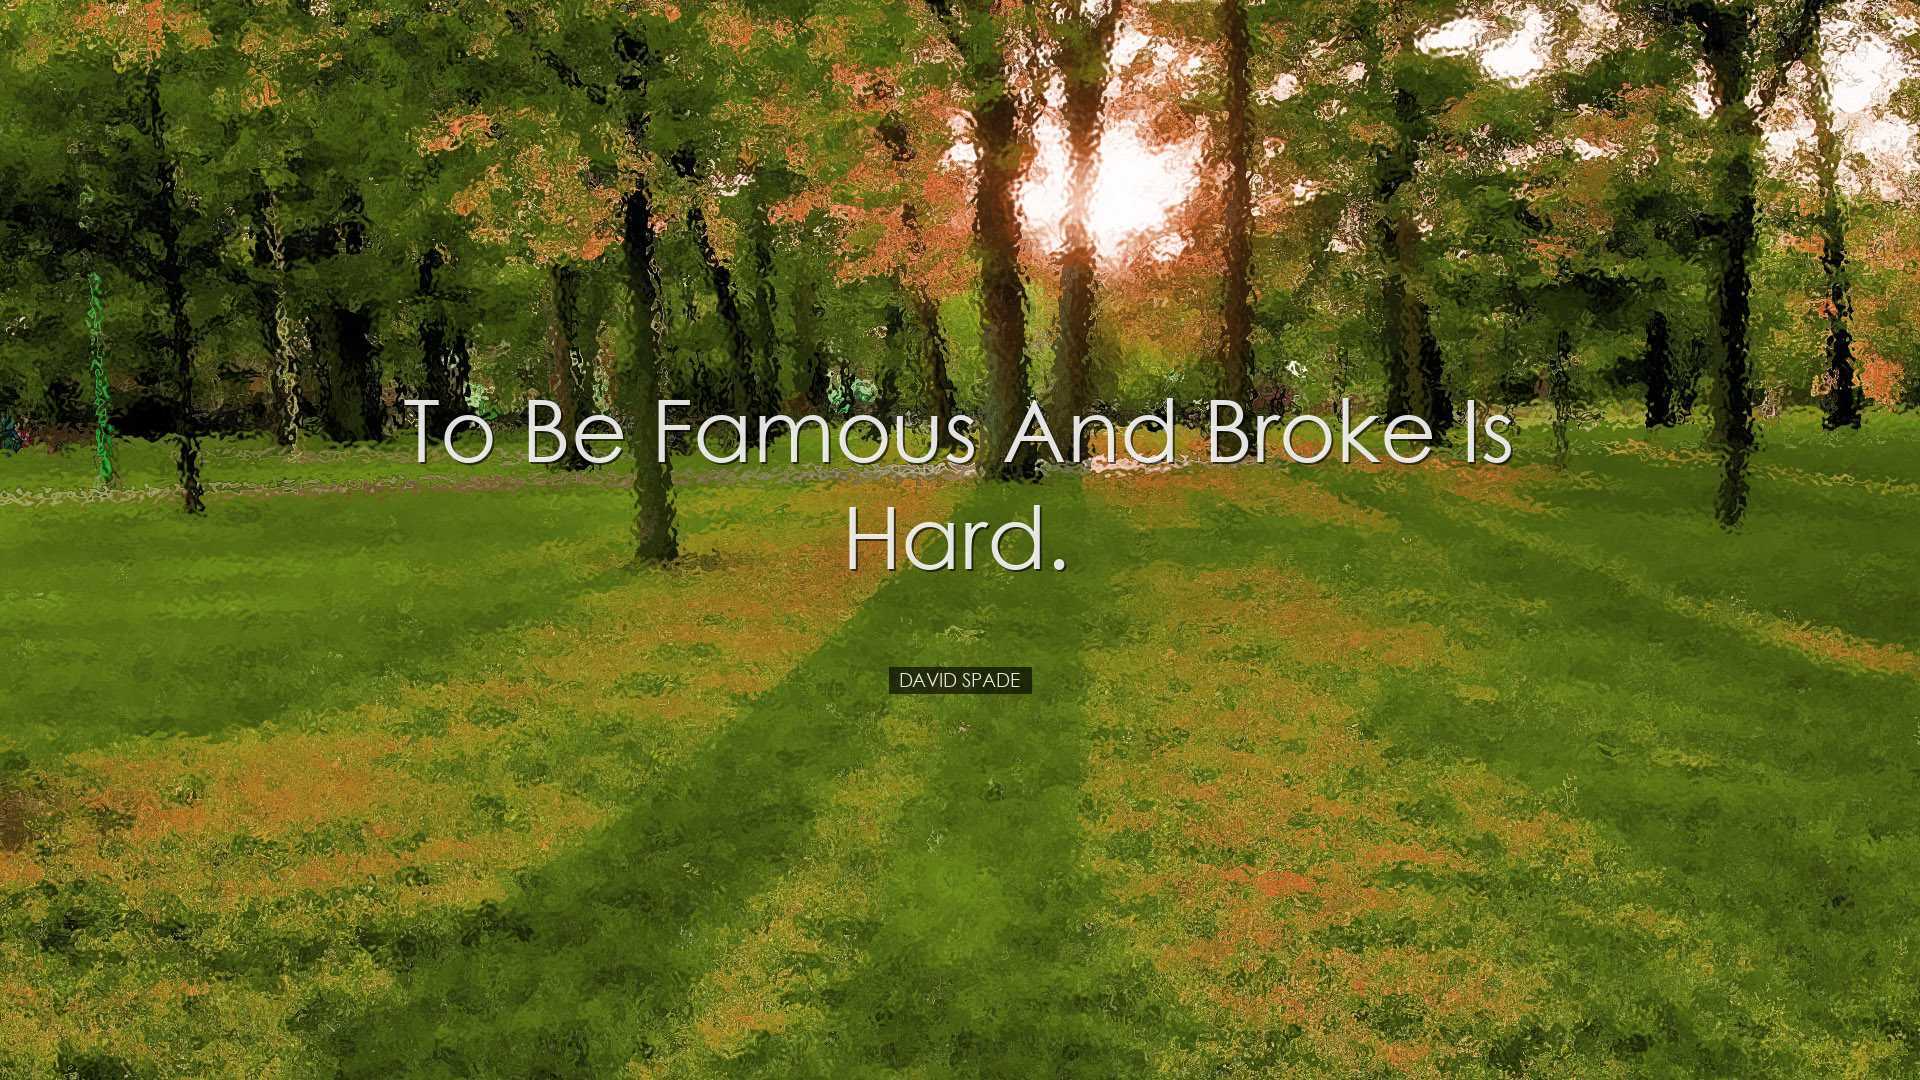 To be famous and broke is hard. - David Spade